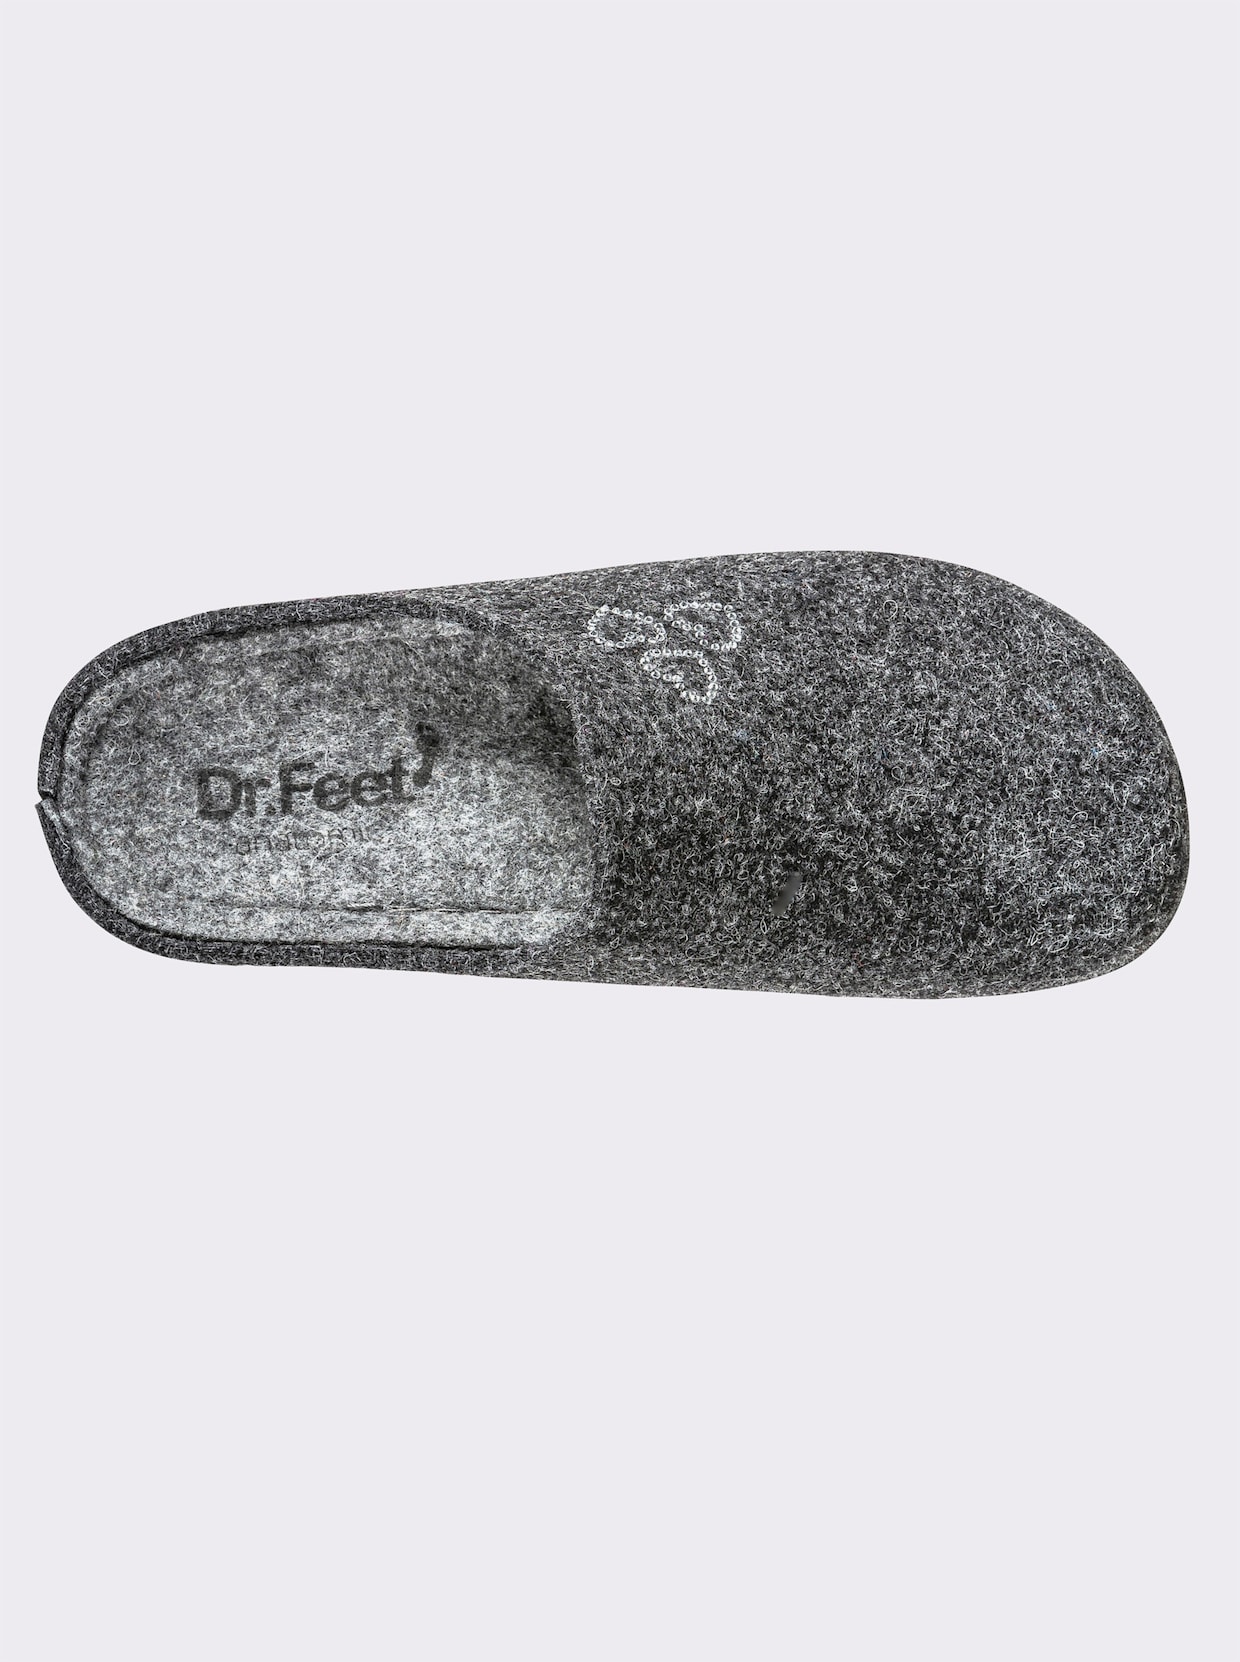 Dr. Feet Chaussons - anthracite